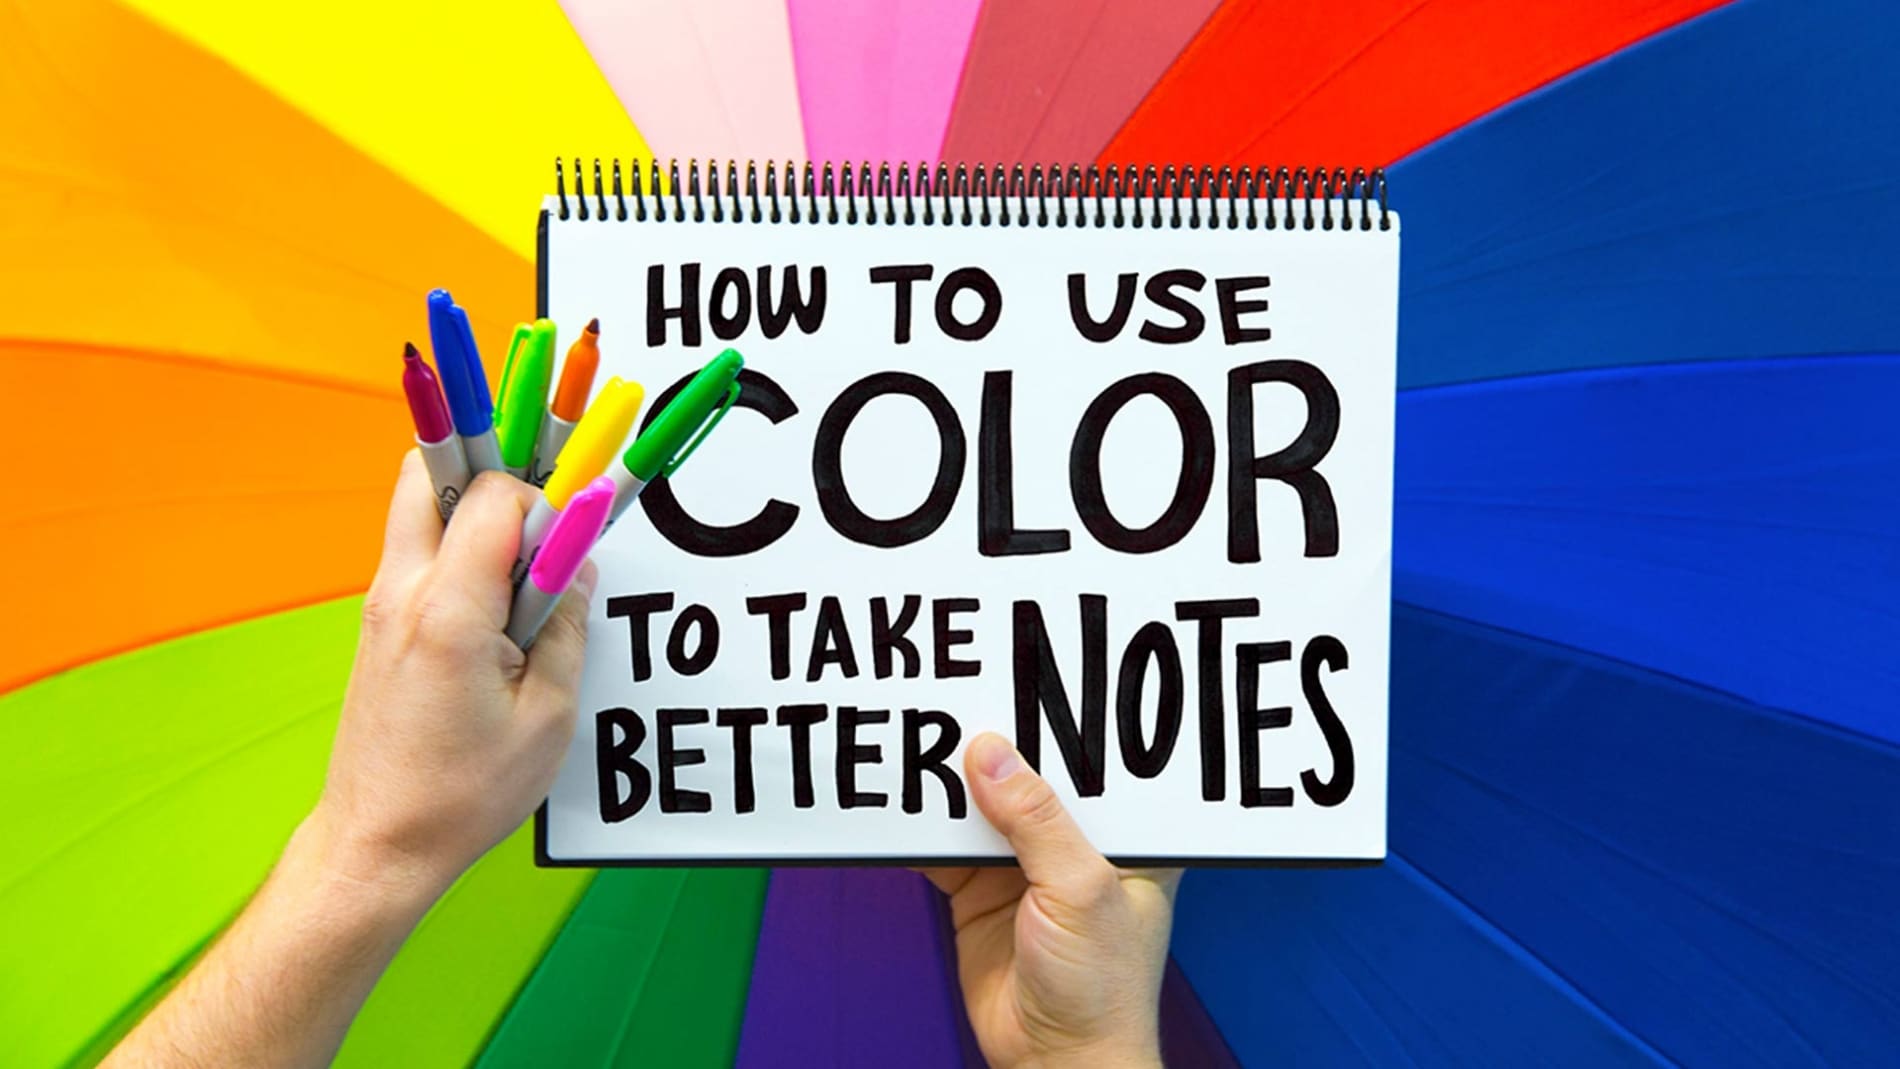 How To Use Color To Take Better Notes